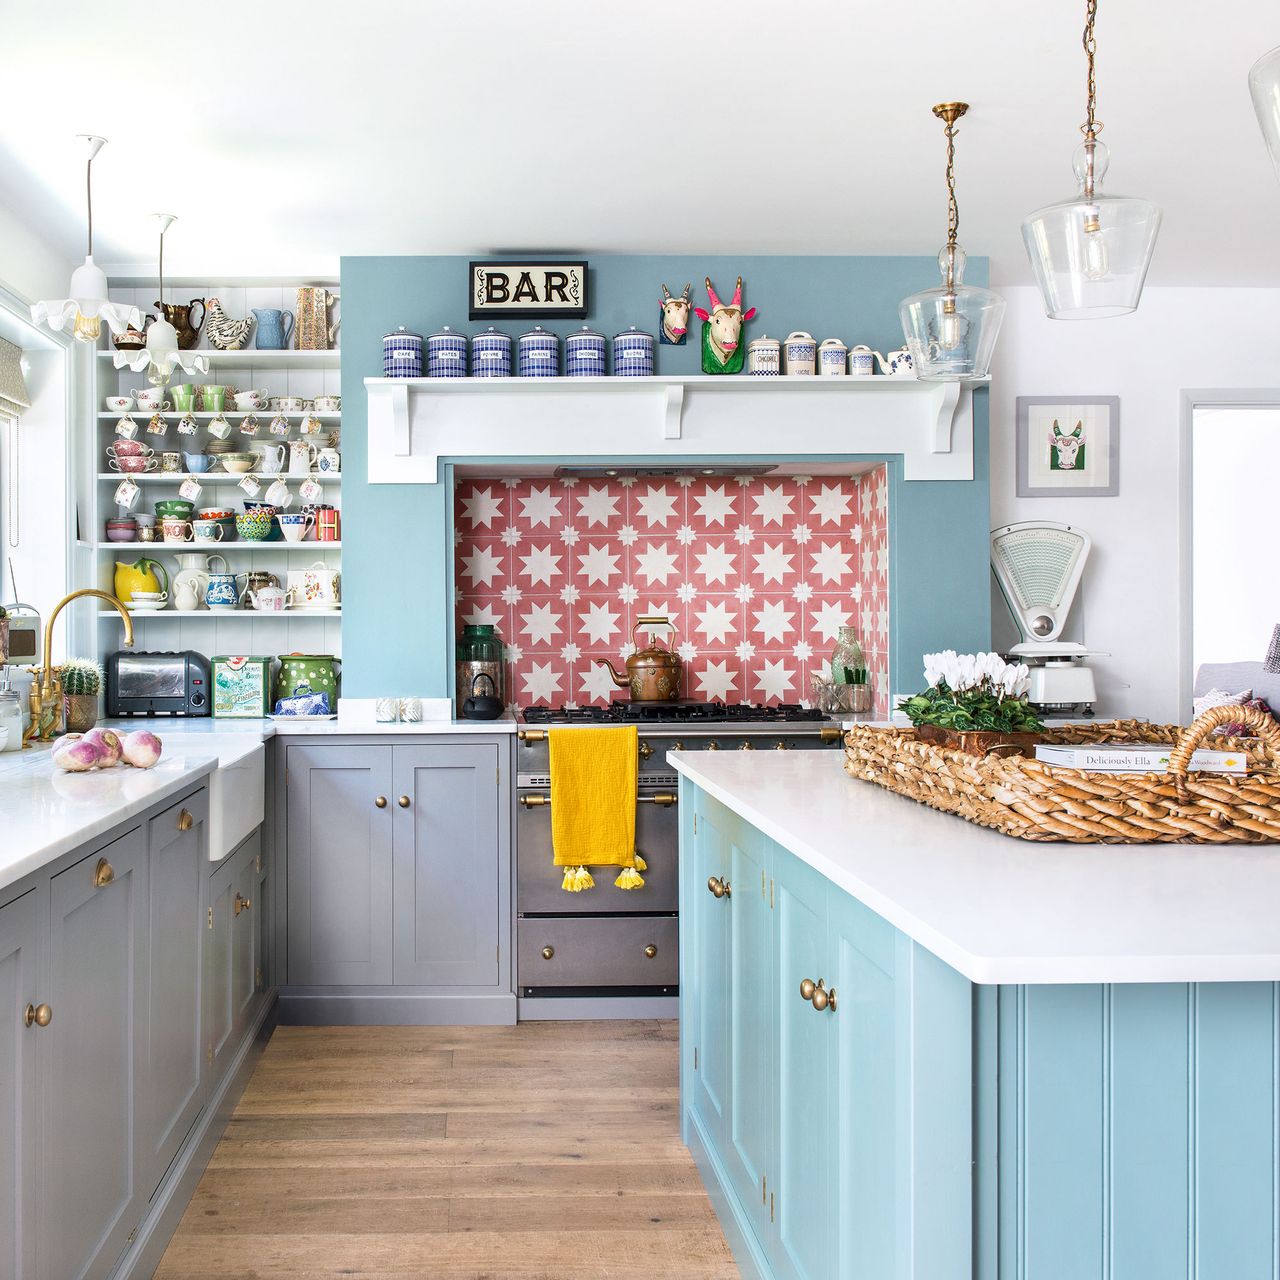 Kitchen island paint ideas to make it the star of the show | Ideal Home